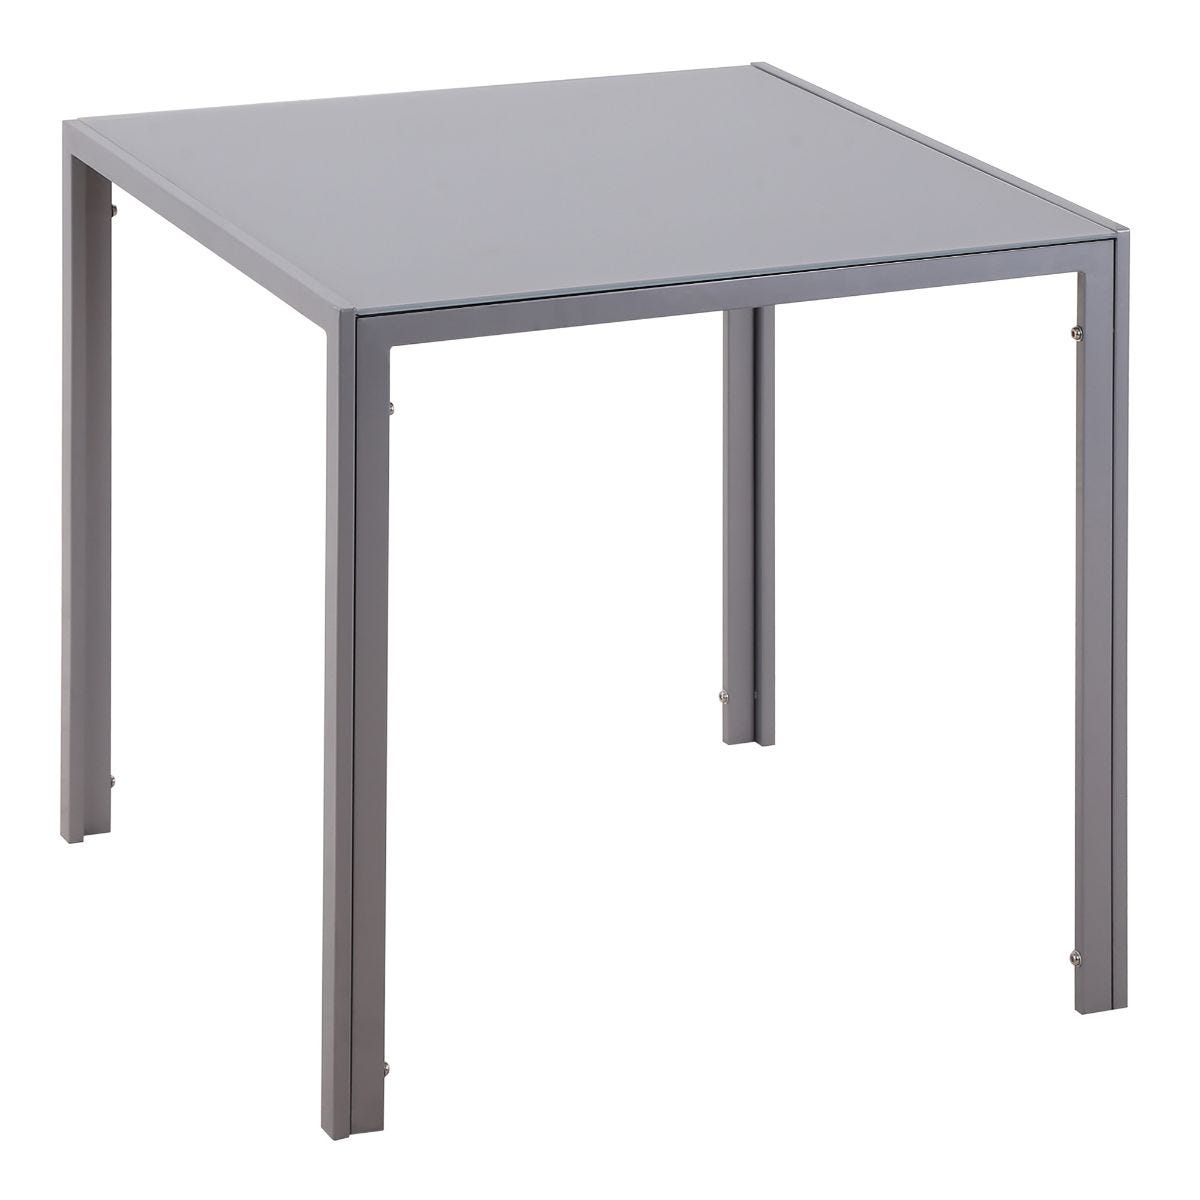 Homcom Modern Square Dining Table With Tempered Glass Top And Metal Legs Grey